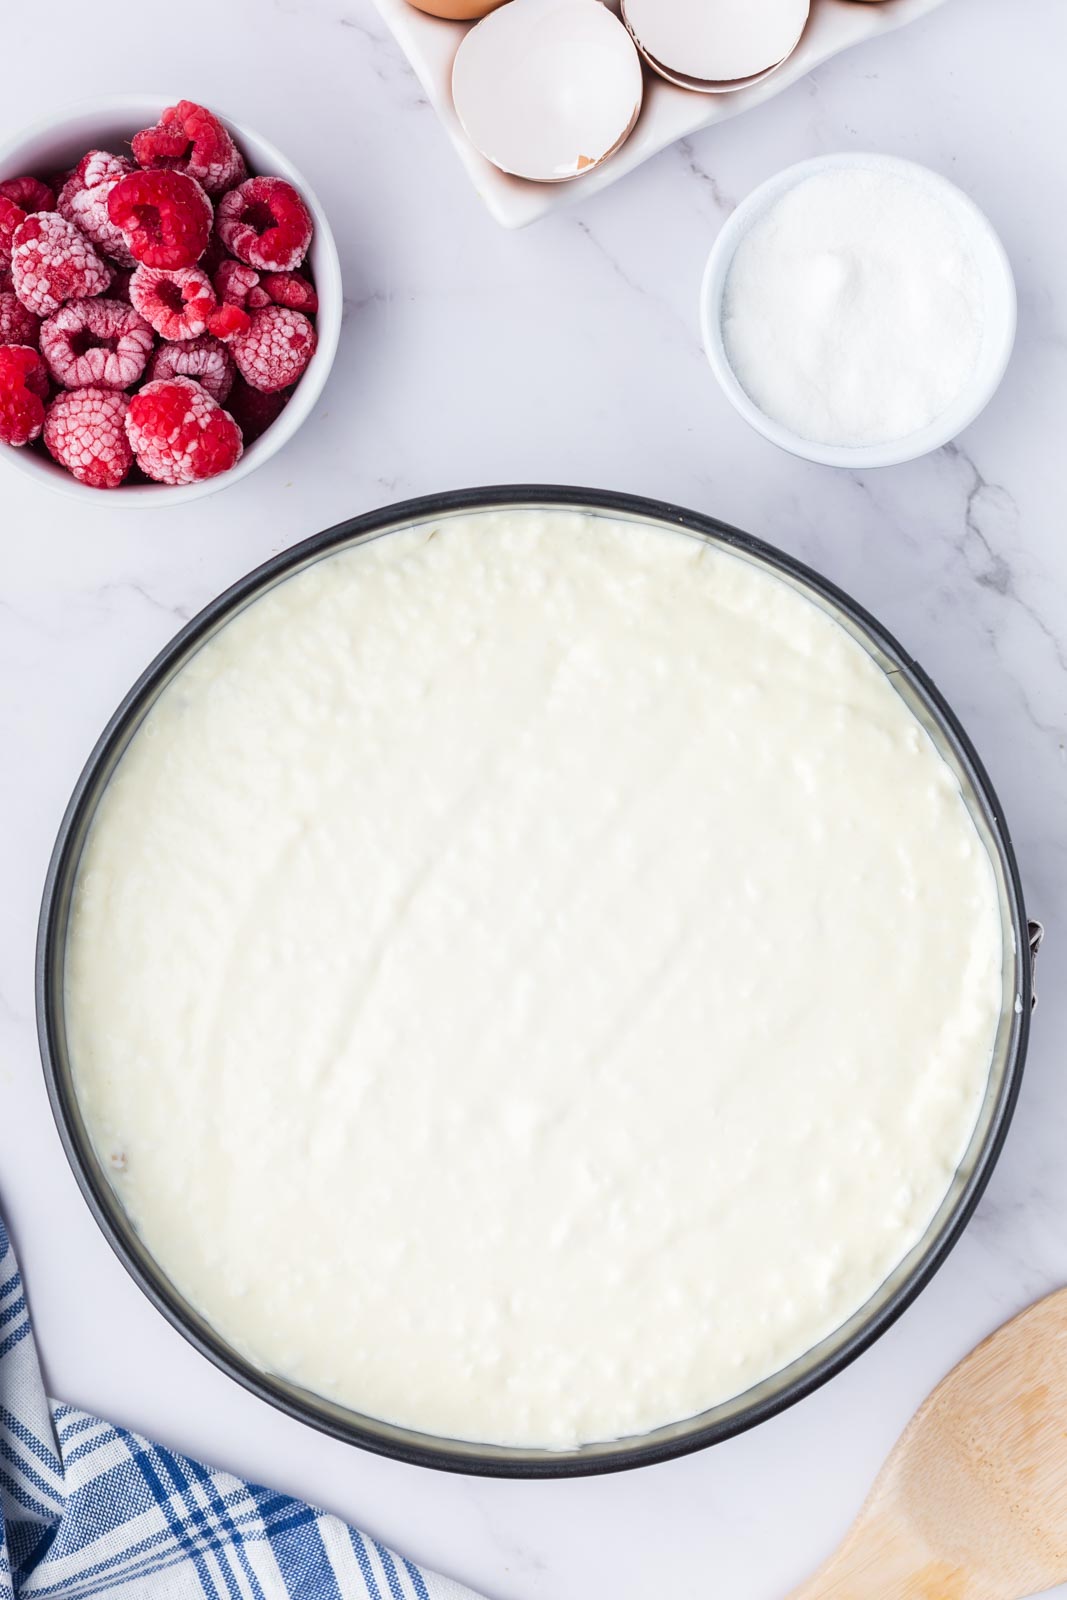 Cheesecake filling in a springform pan ready to be bakes. Frozen raspberries standby.